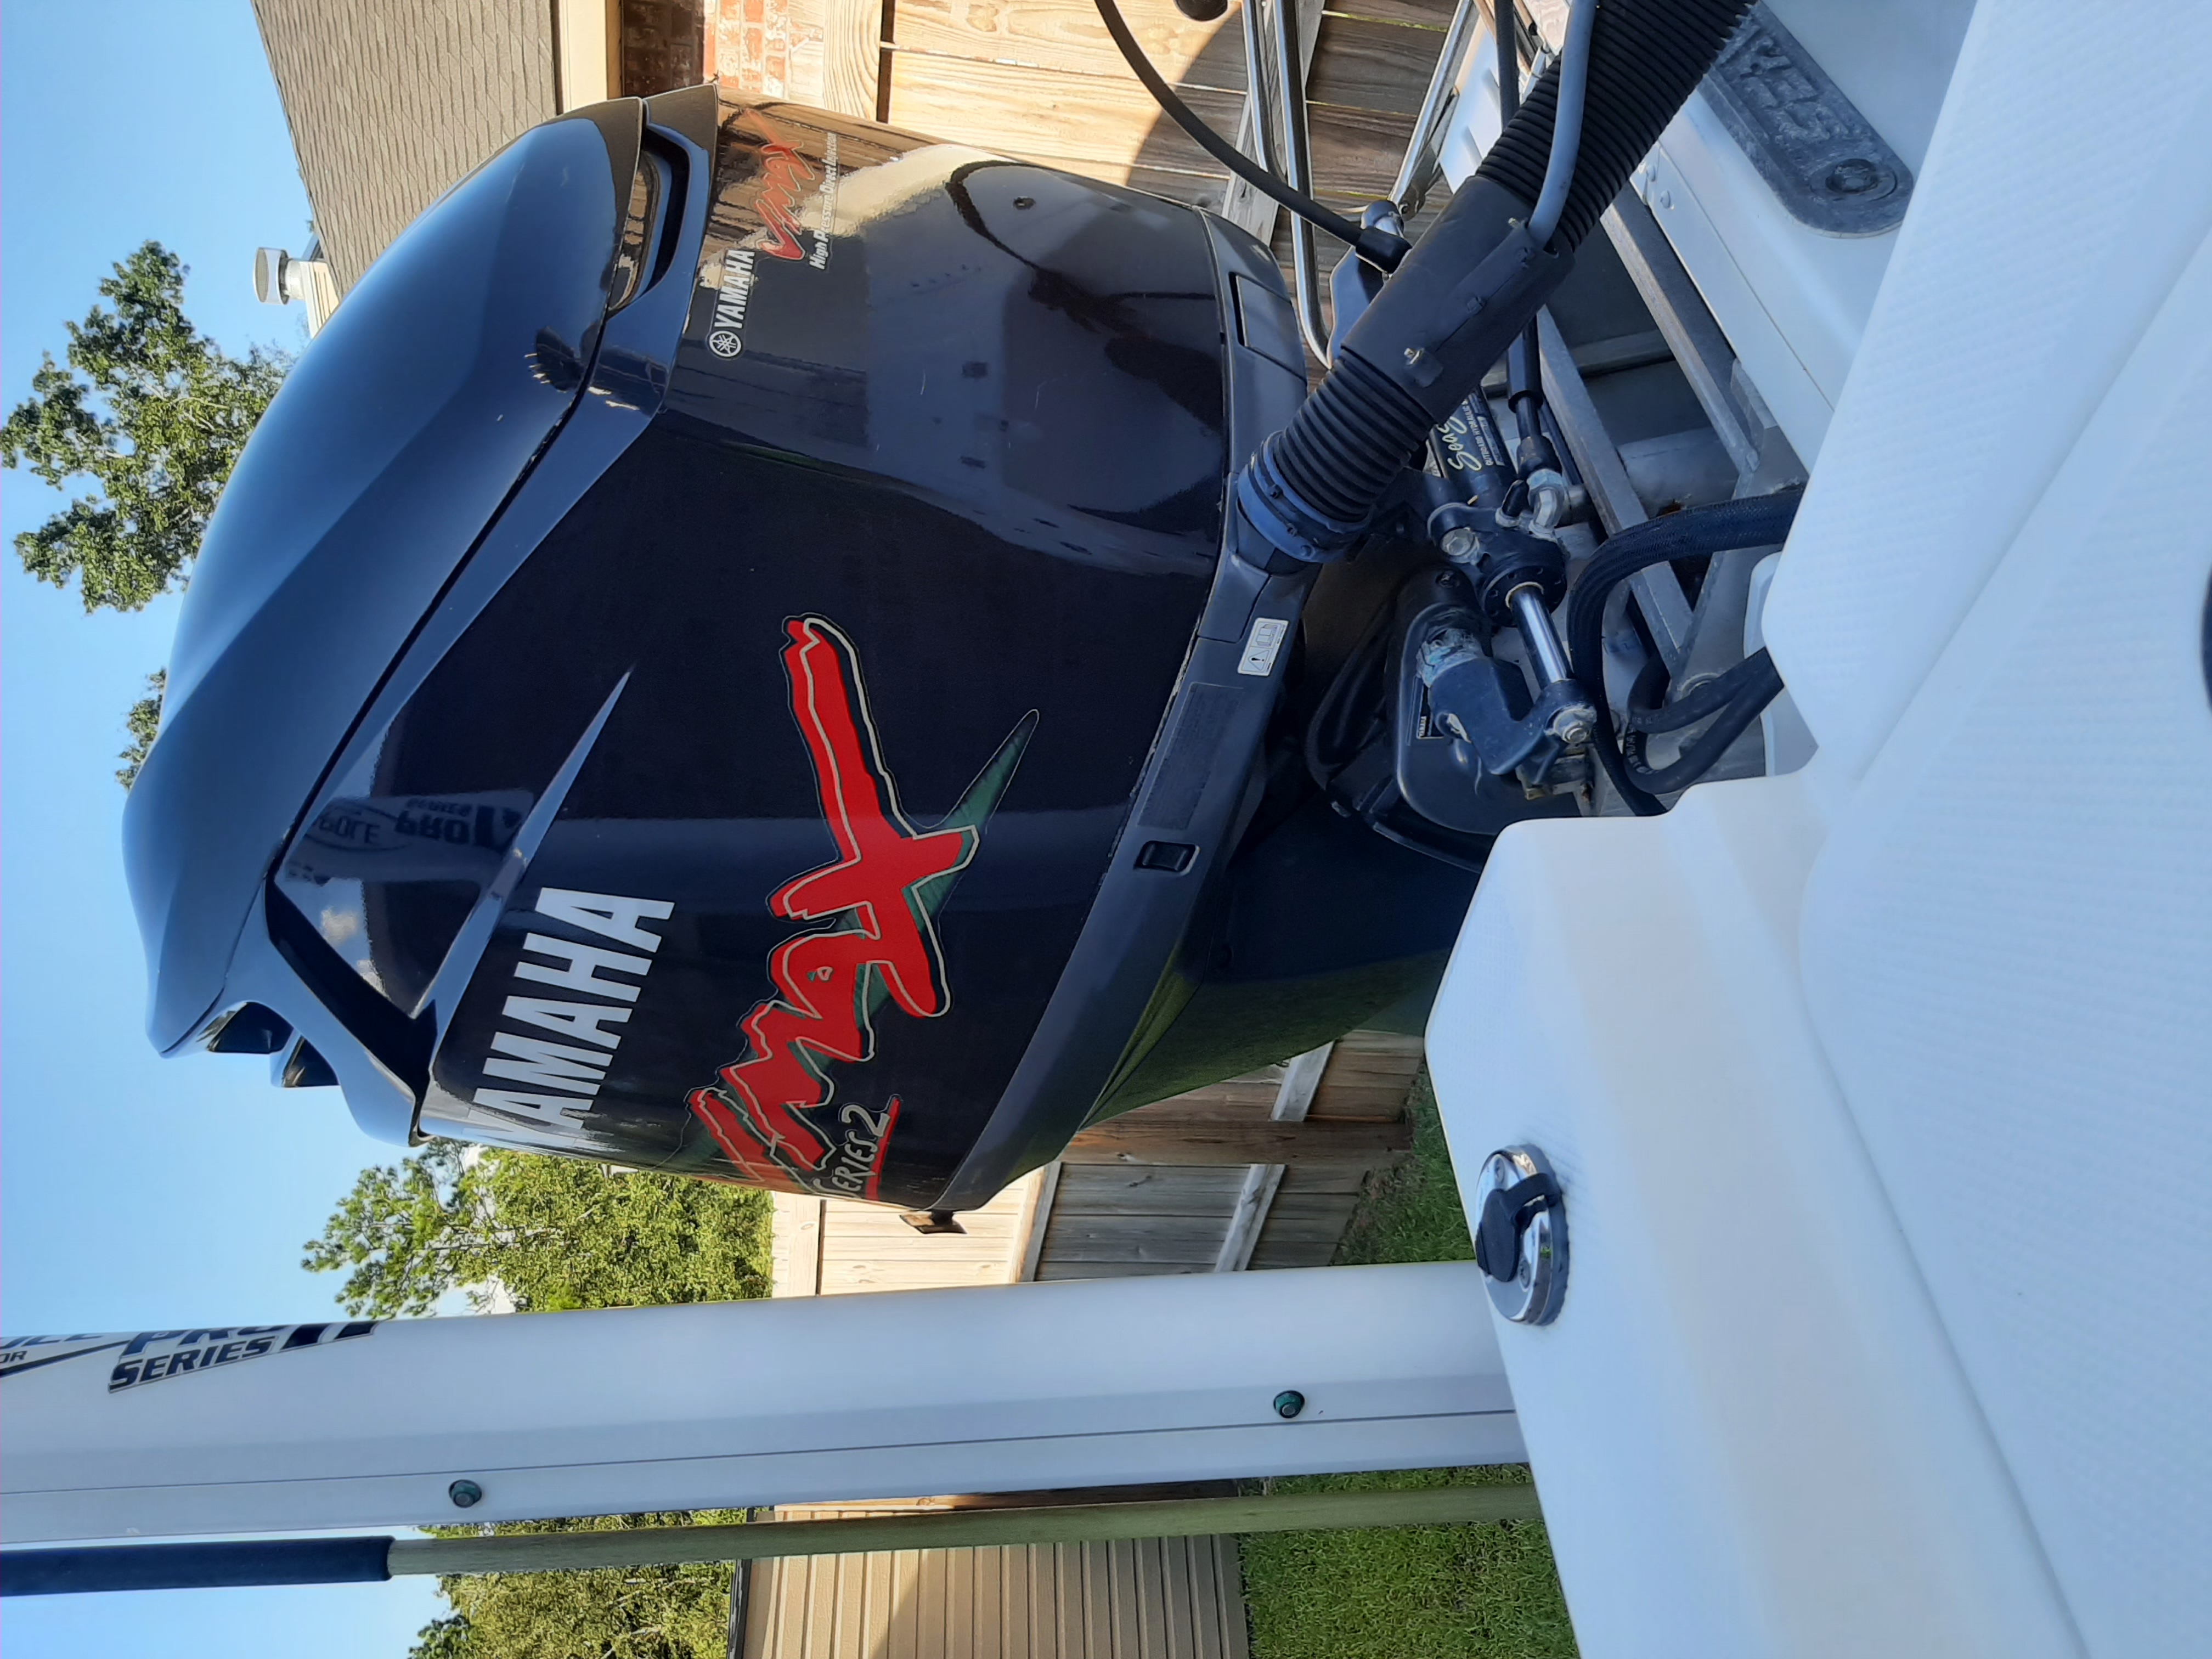 2011 Sea Fox 220XT Fishing boat for sale in Cantonment, FL - image 1 